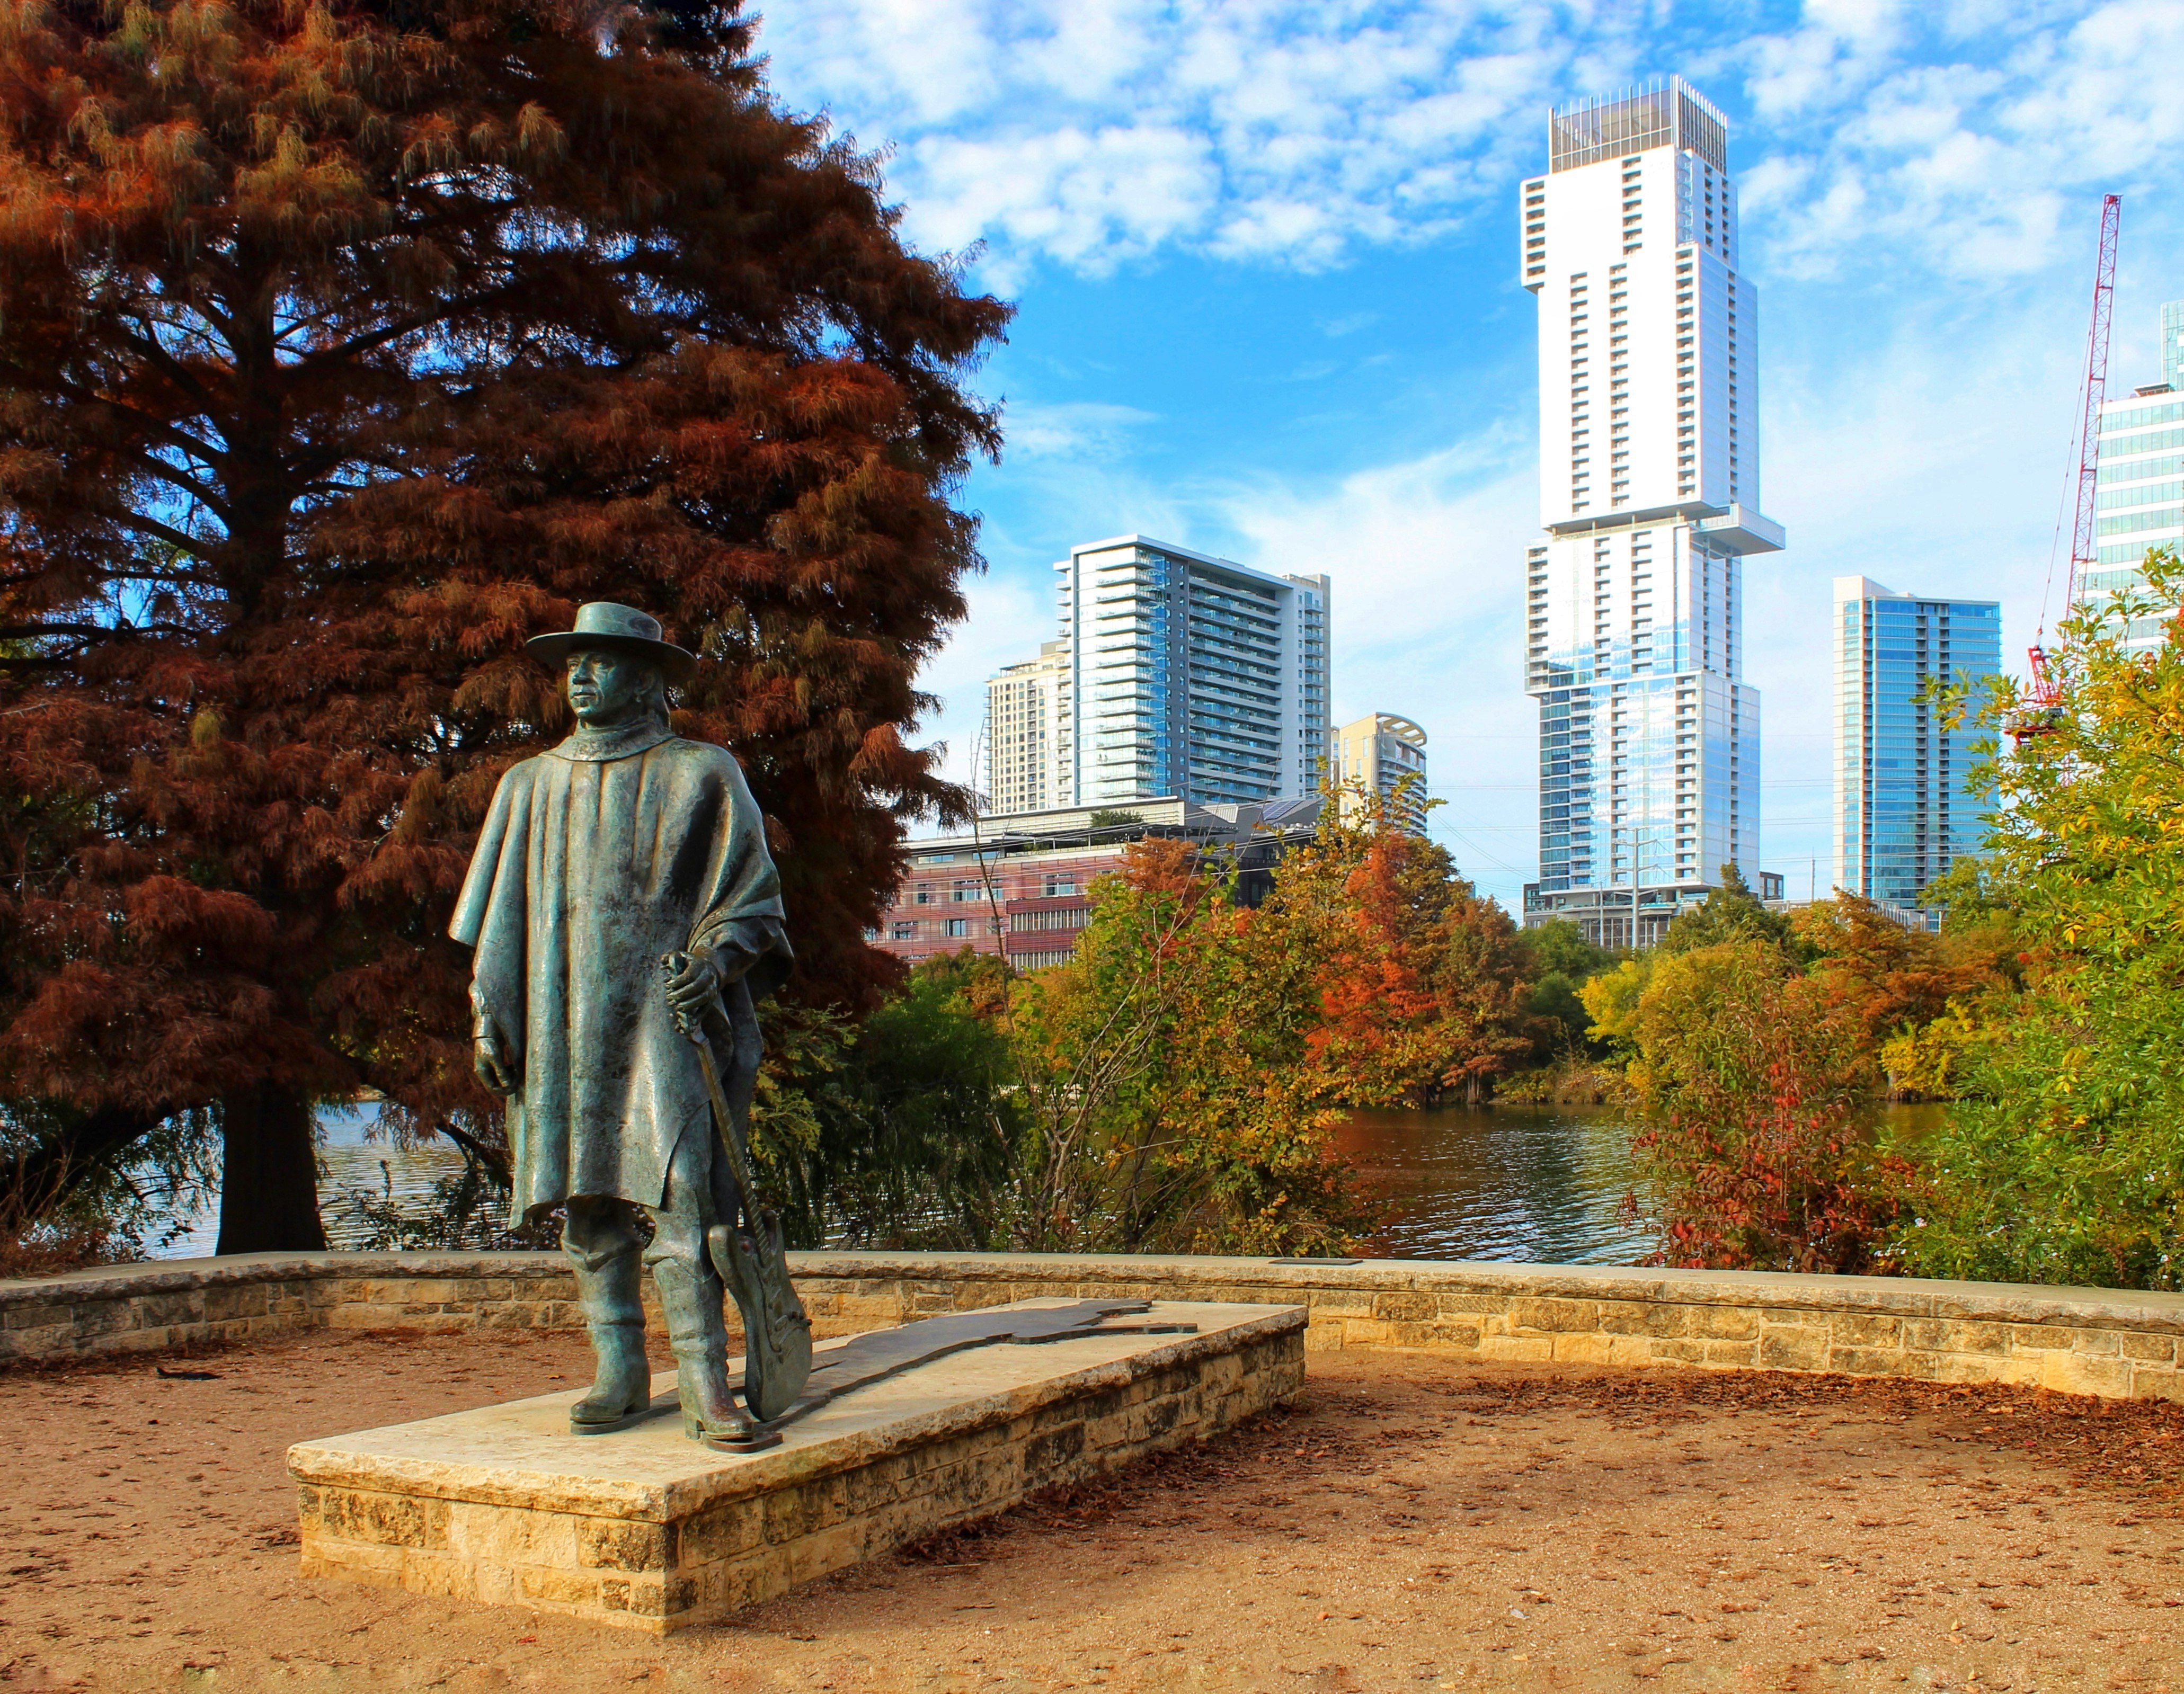 A statue of musician Stevie Ray Vaughan stands in Austin, Texas. The sun is shining and tall buildings are visible in the background. 